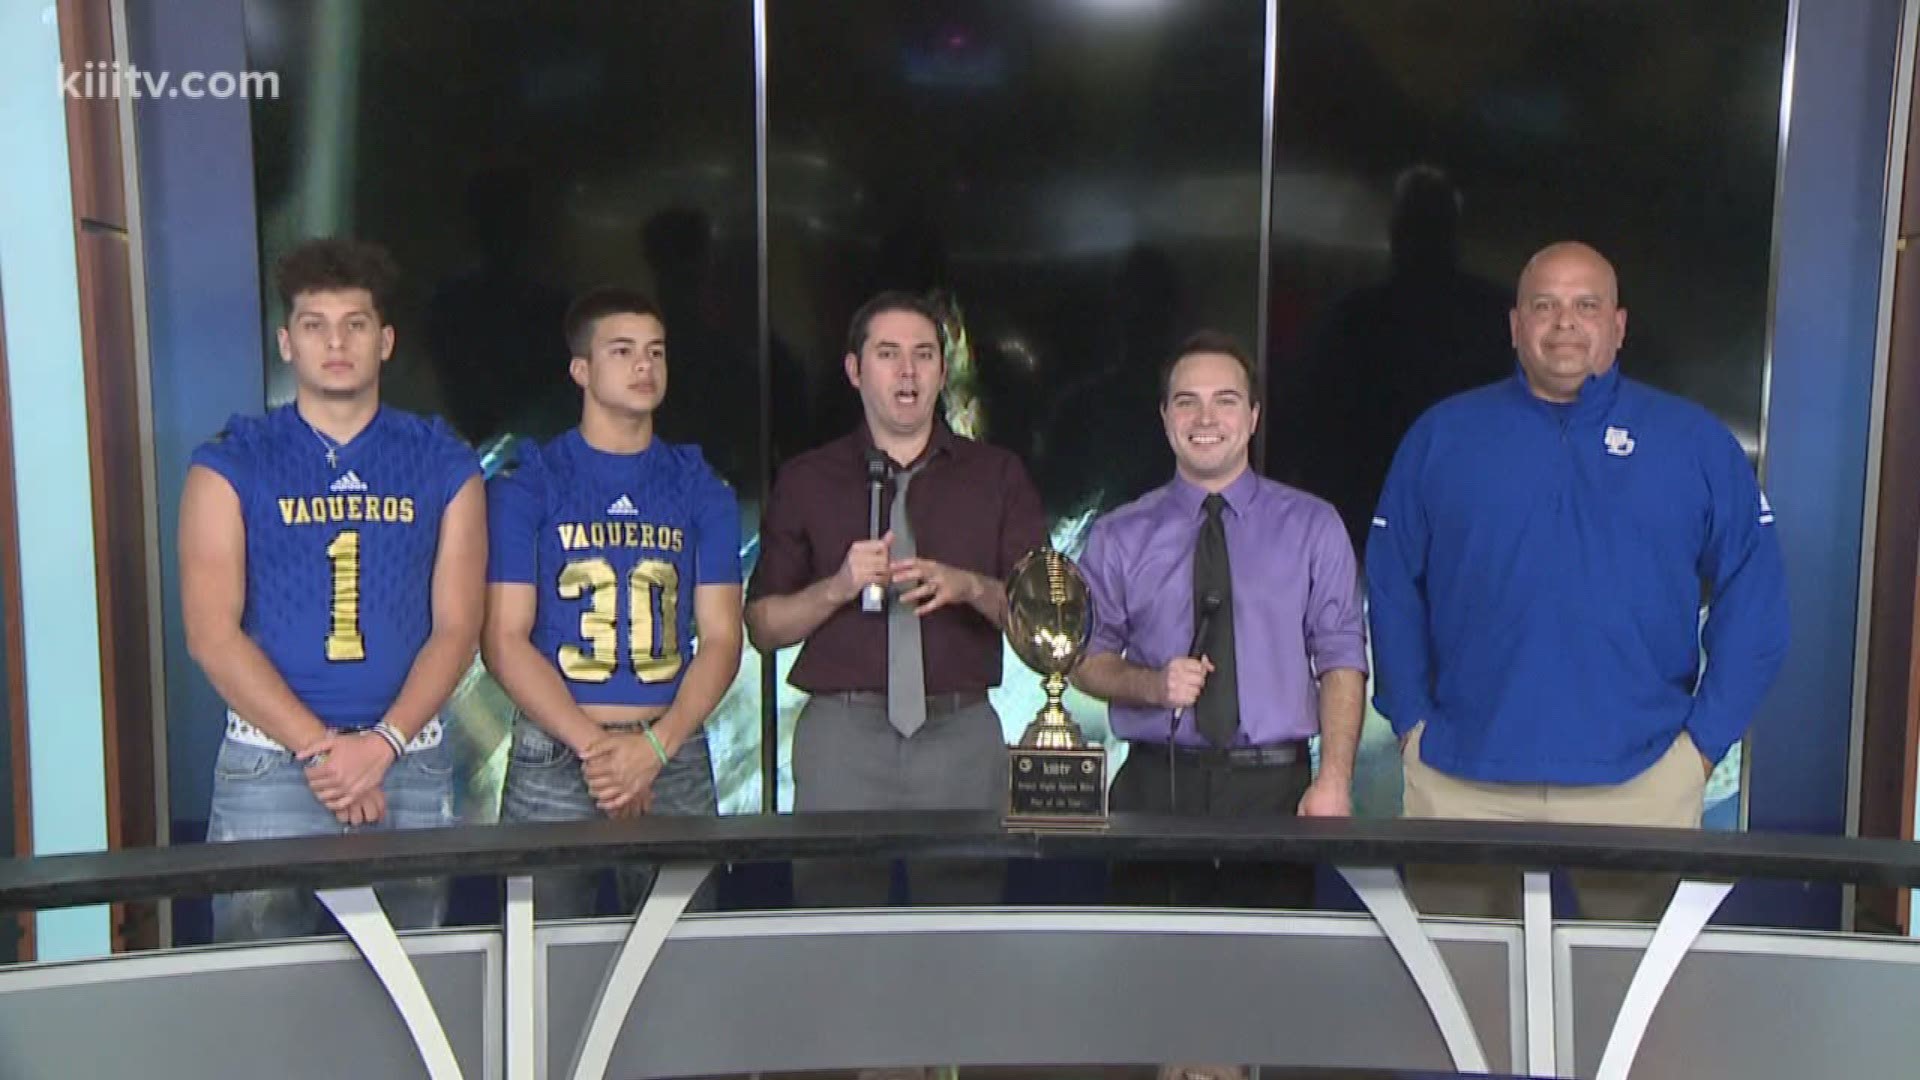 Congratulations to San Diego's Sergio Guerra and Ryan Ochoa on winning our 2018 3Sports Blitz Play of the Year!